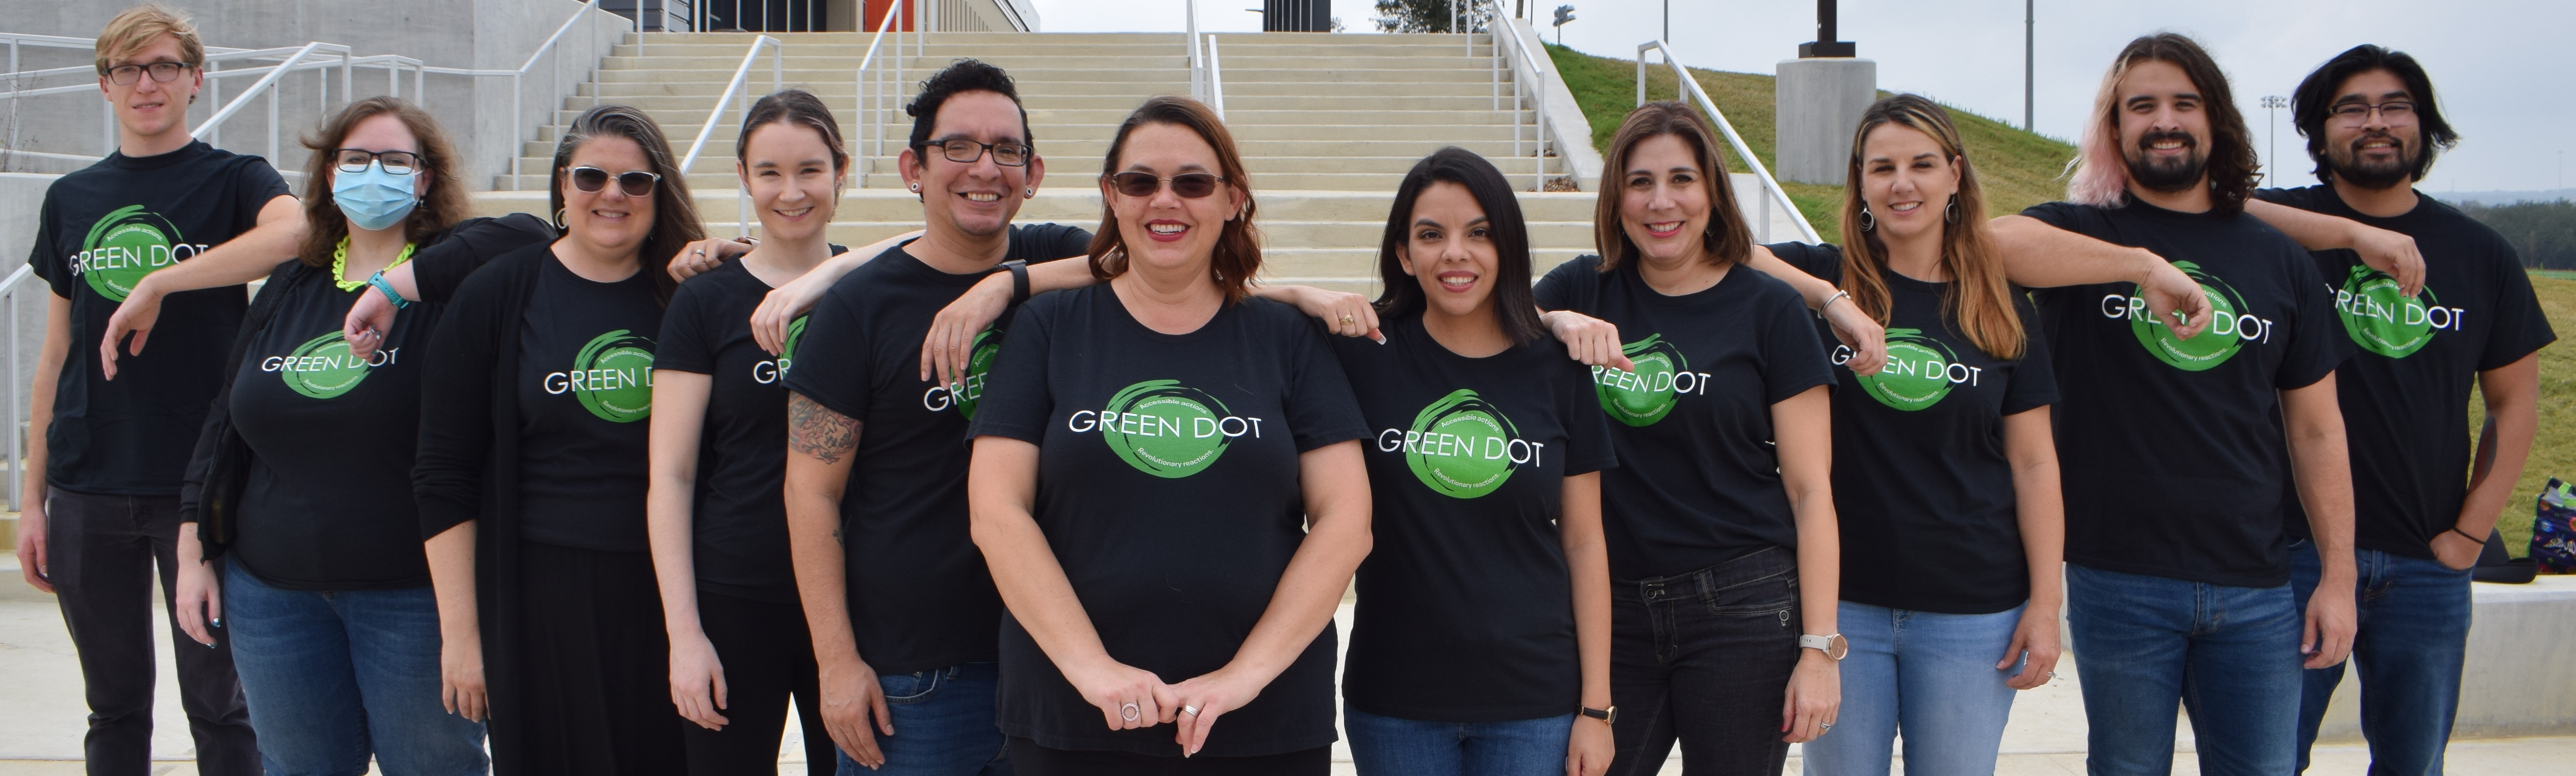 People standing in front of stairs in Green Dot shirts